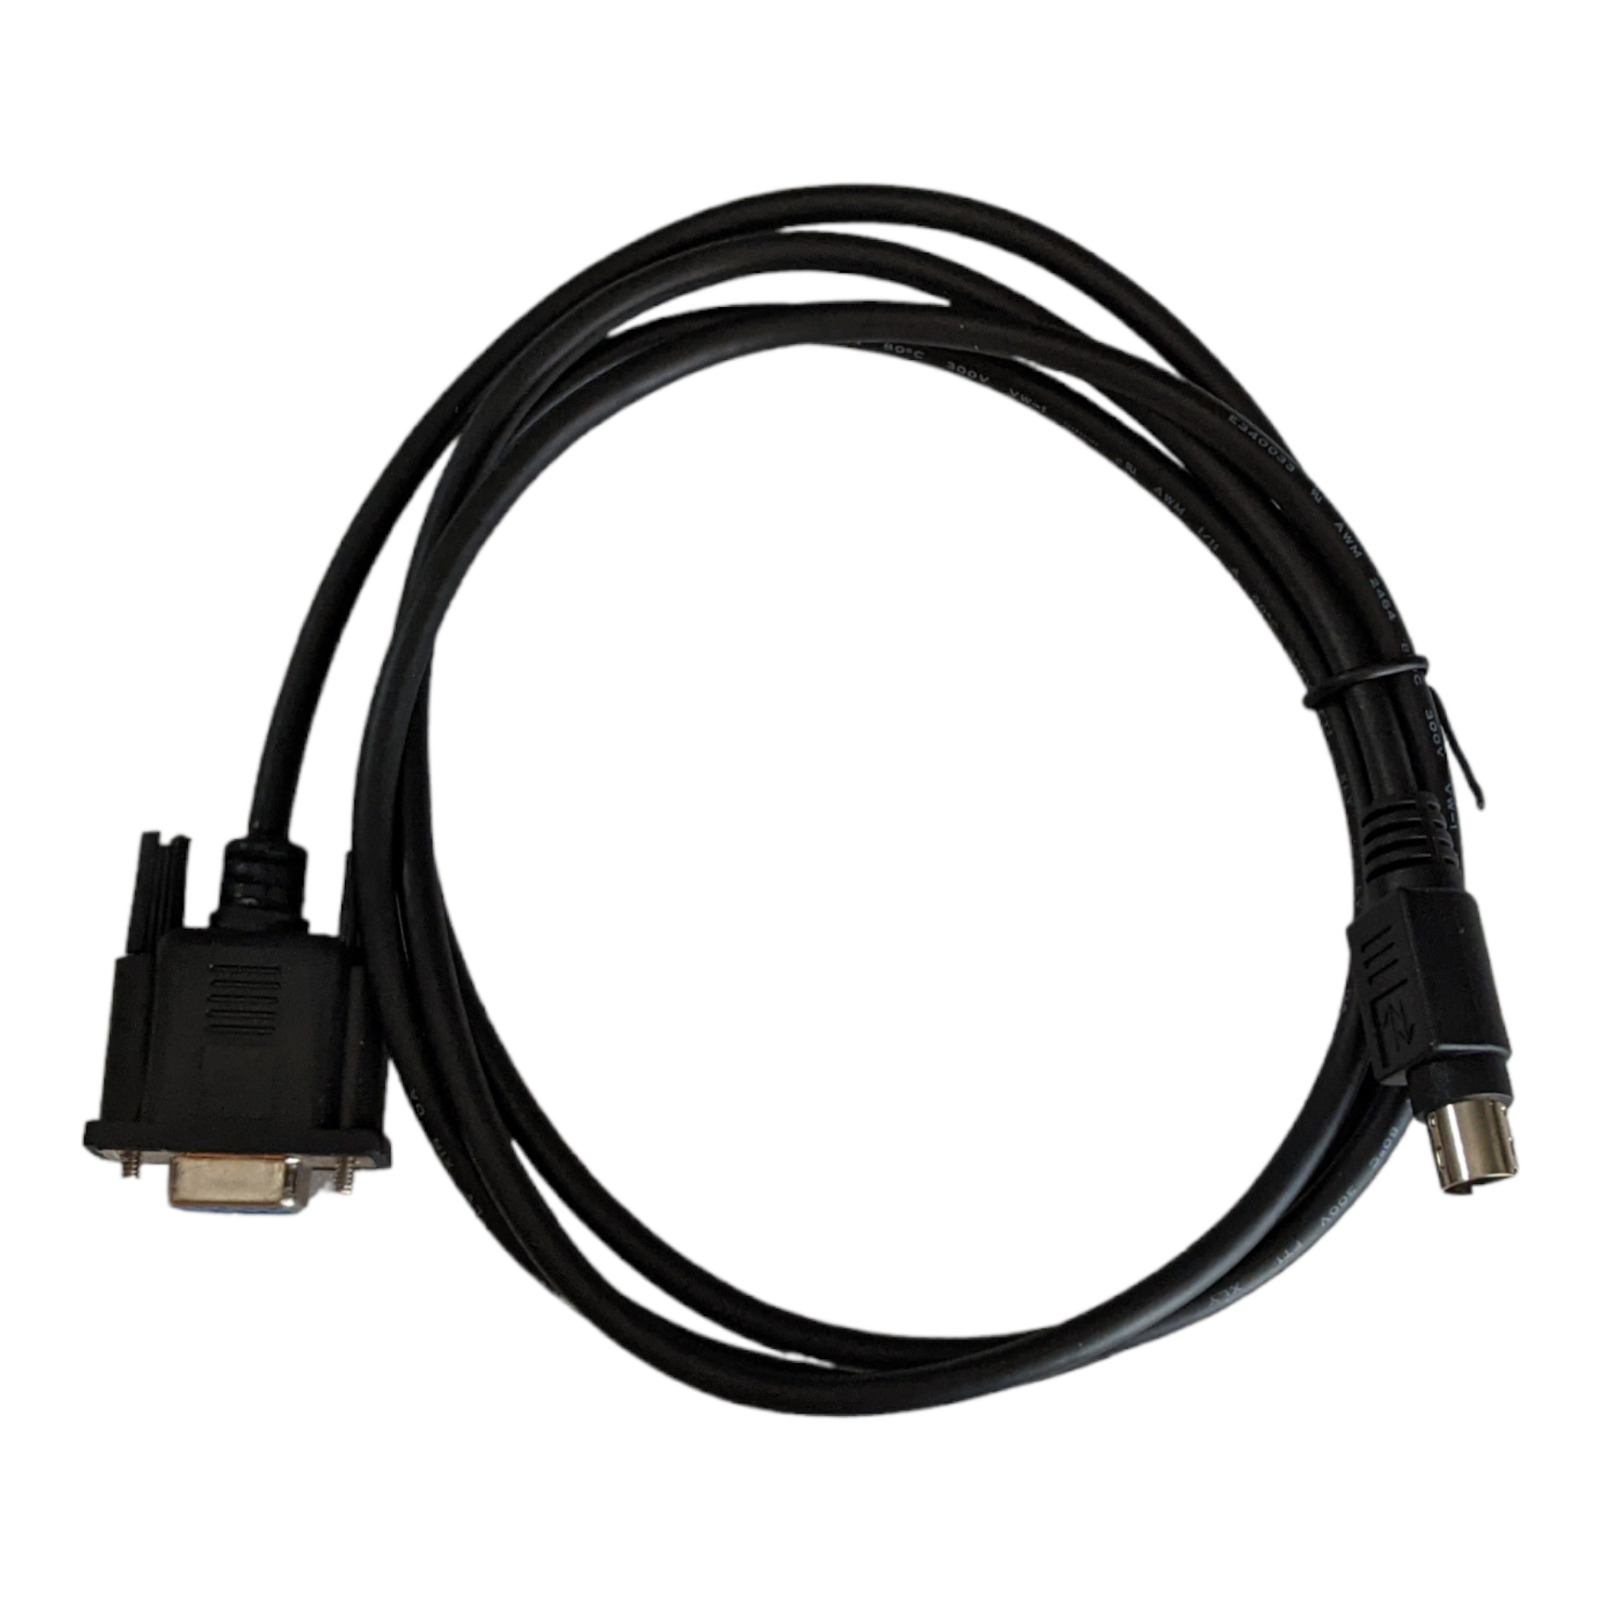 NEW Password Reset/Service Cable FOR DELL MD3200i MN657 MD1200 MD3200 MD3600i 